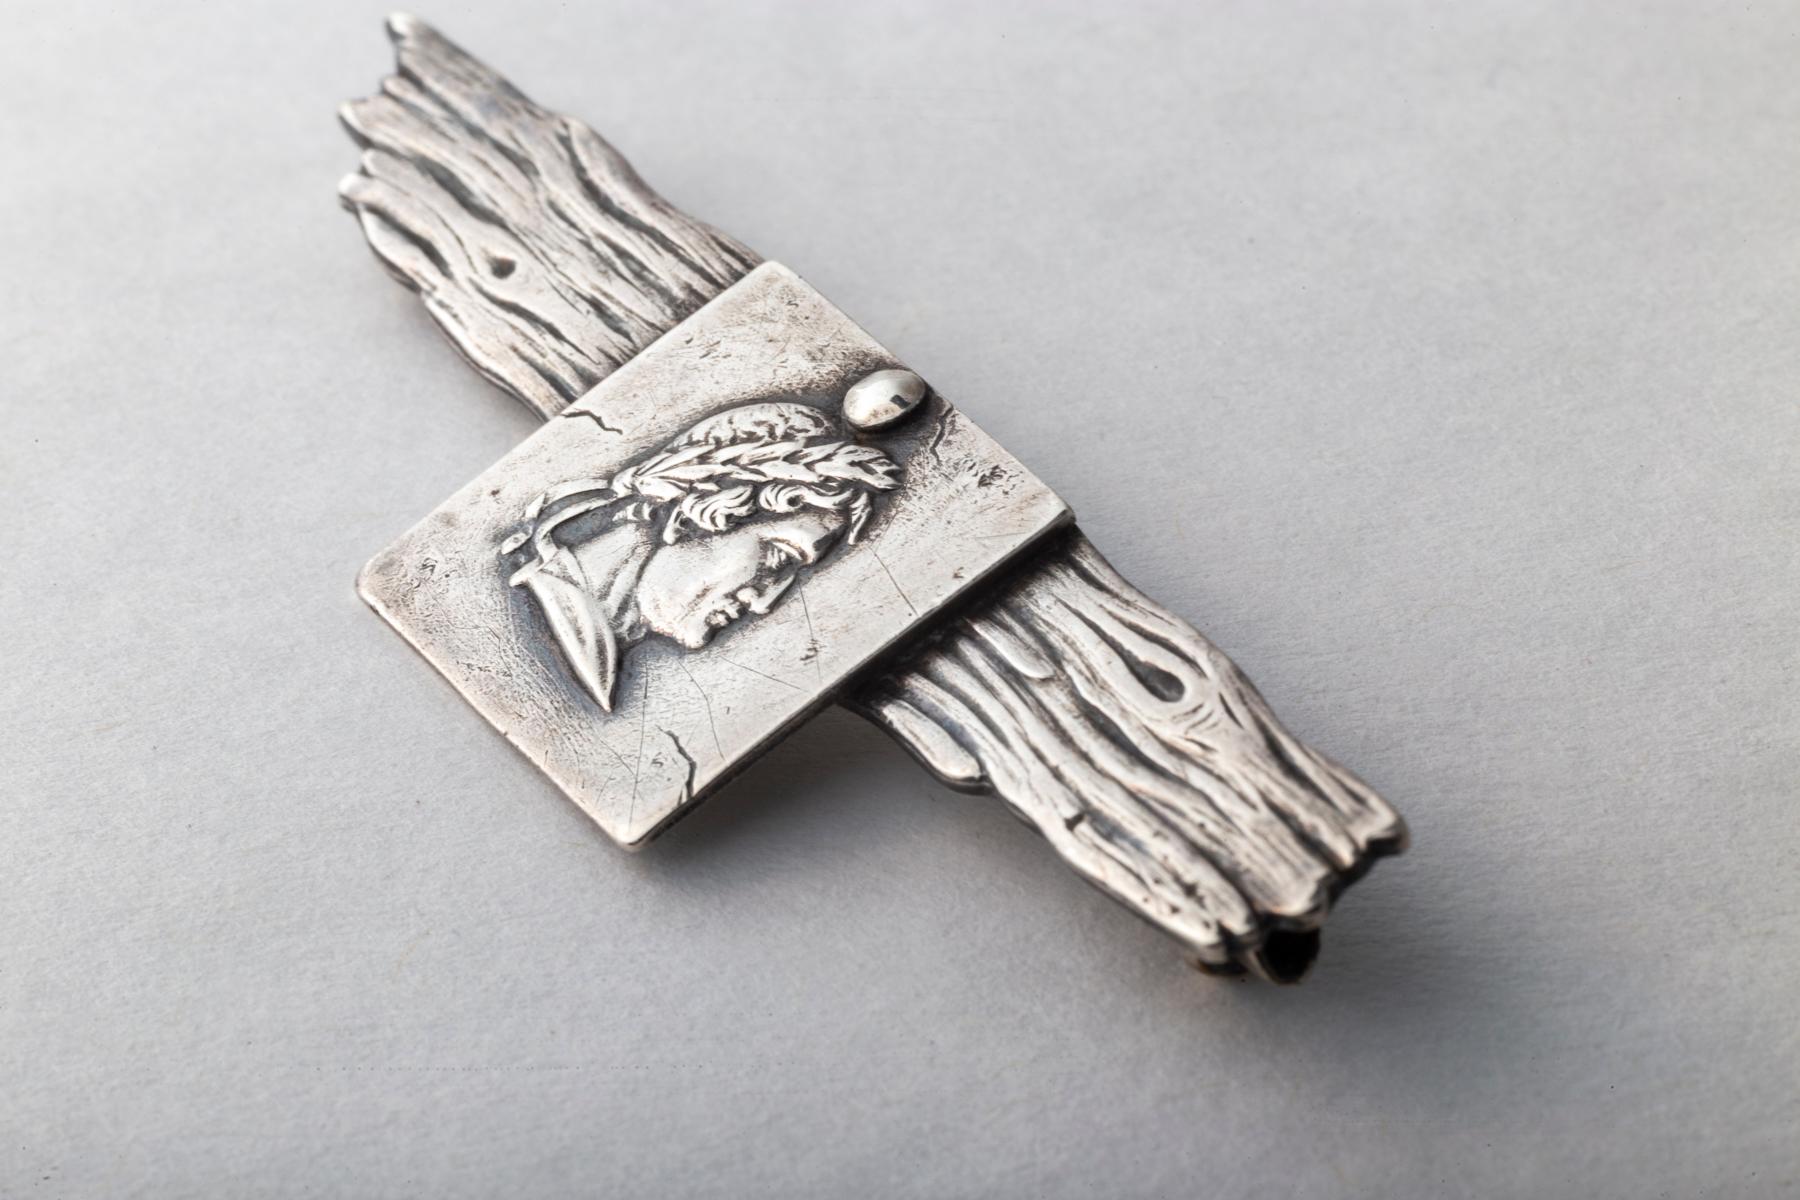 A Sterling Silver Pin done to fool the eye is an engraved classical head attached with a tack to tree bark. In fact the term Trompe L'oile literally means to fool the eye. The Trompe L'oile on bark was popular in Russia in the late 19th century. The